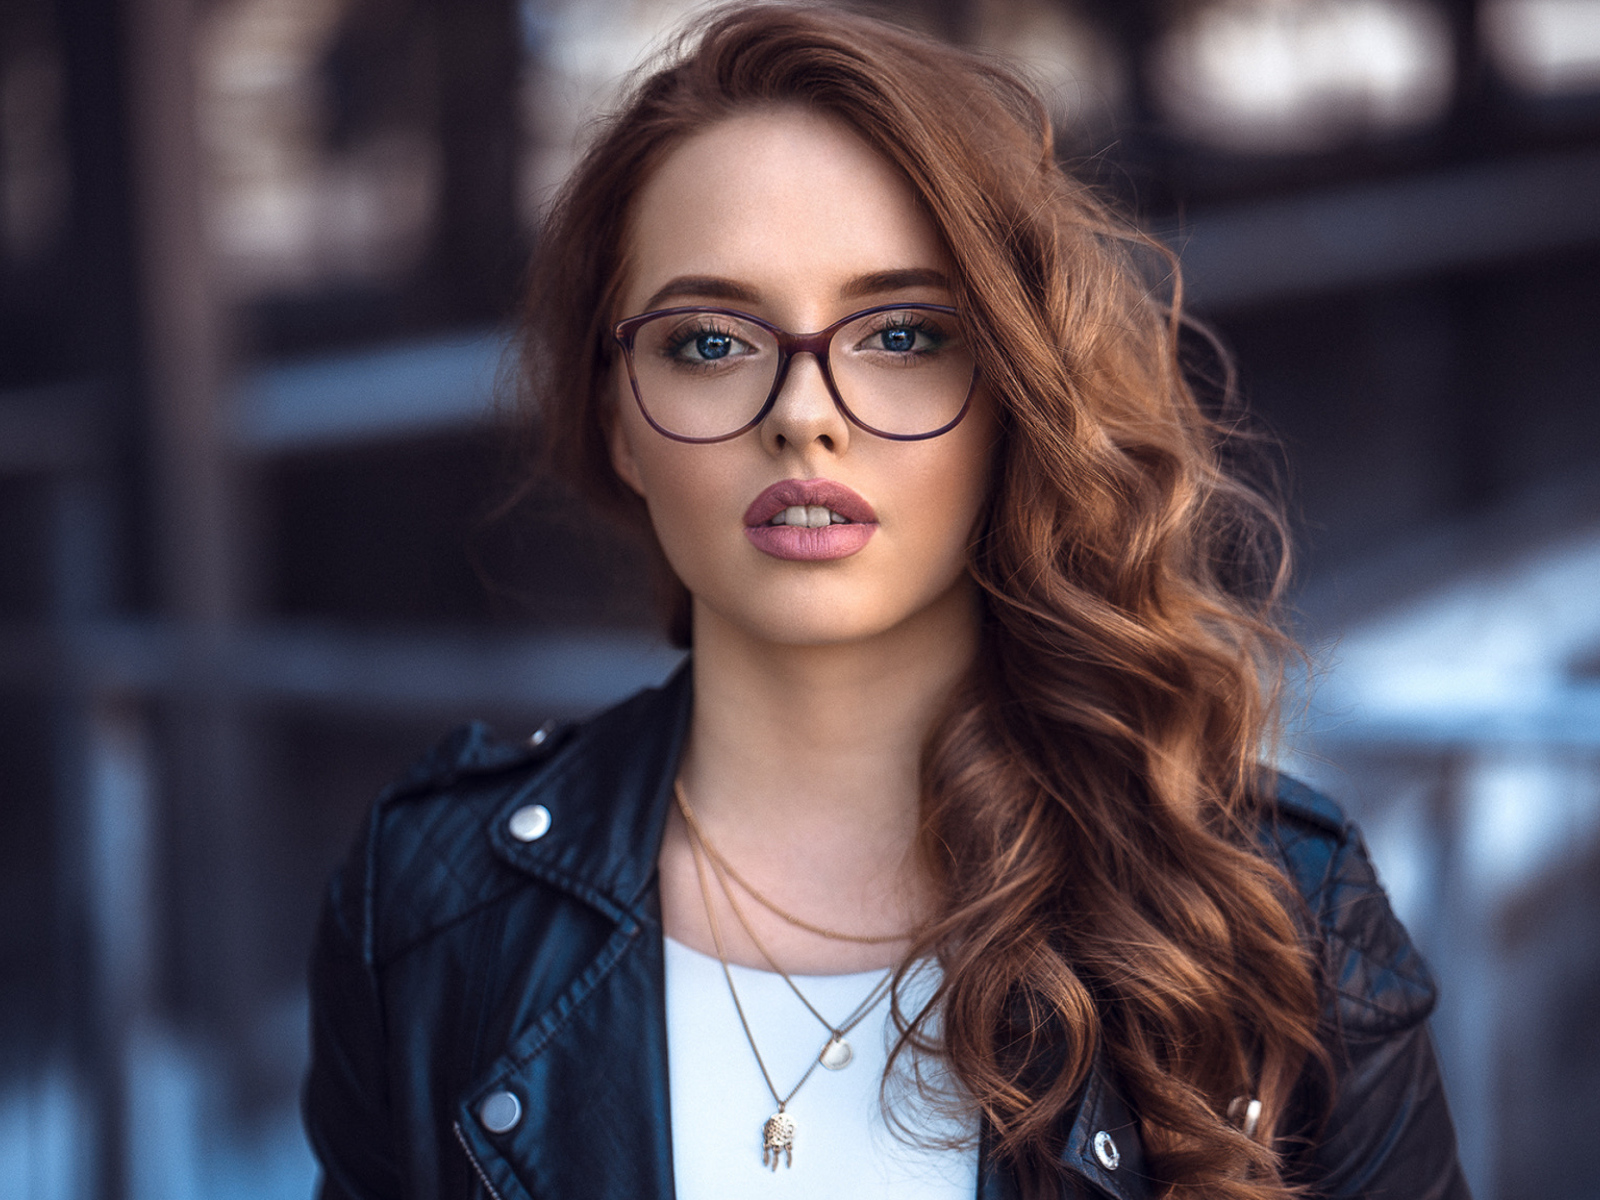 Girl in a black jacket with glasses